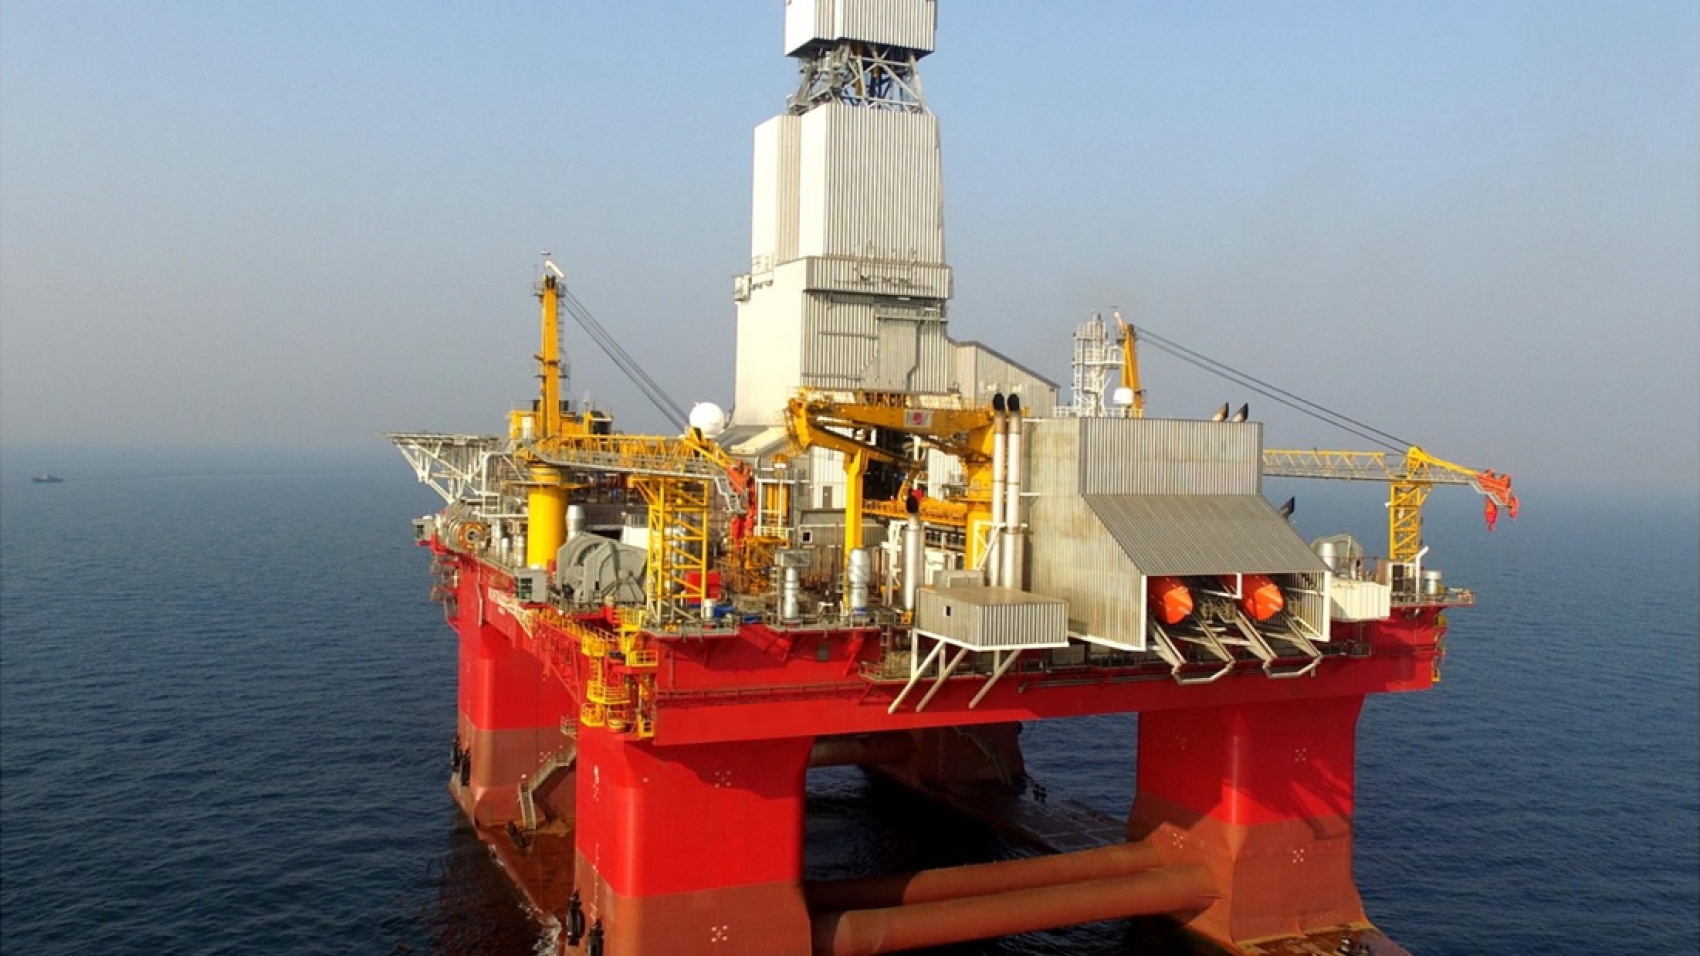 Used Barge Rigs For Sale, Barge Drilling Rigs for sale